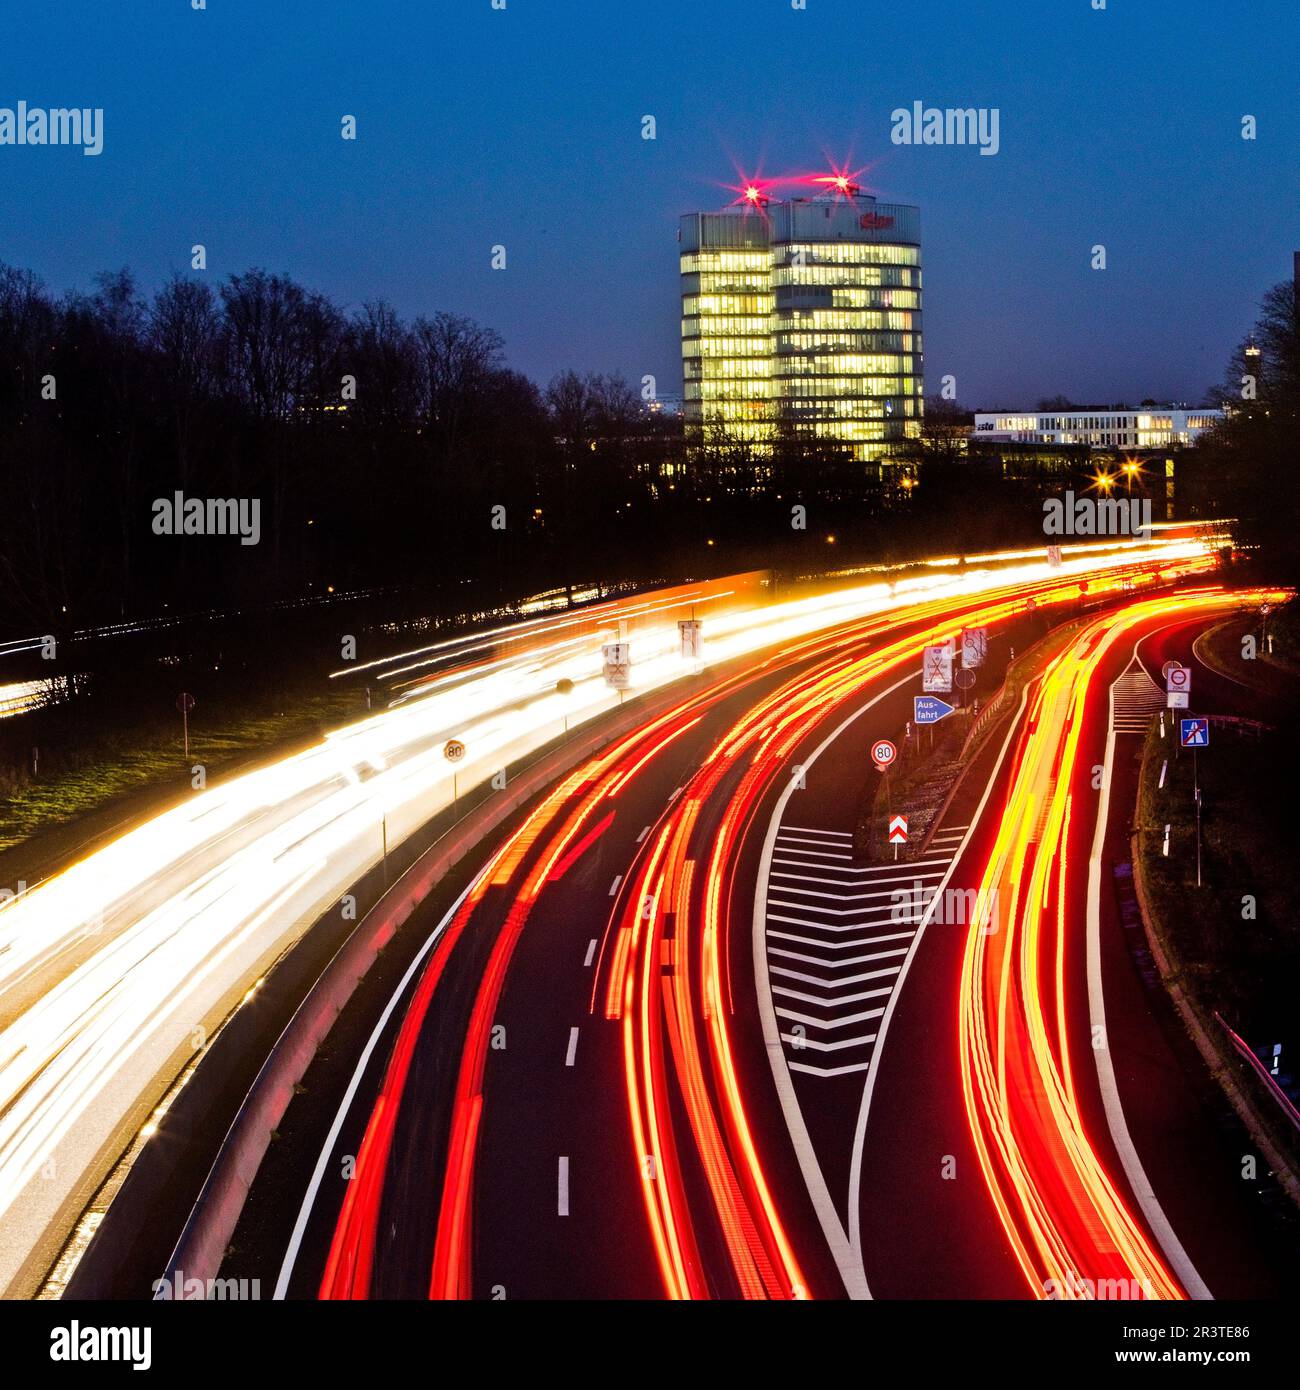 Highway A 52 and the E.ON SE corporate headquarters in the evening, Essen, Germany, Europe Stock Photo